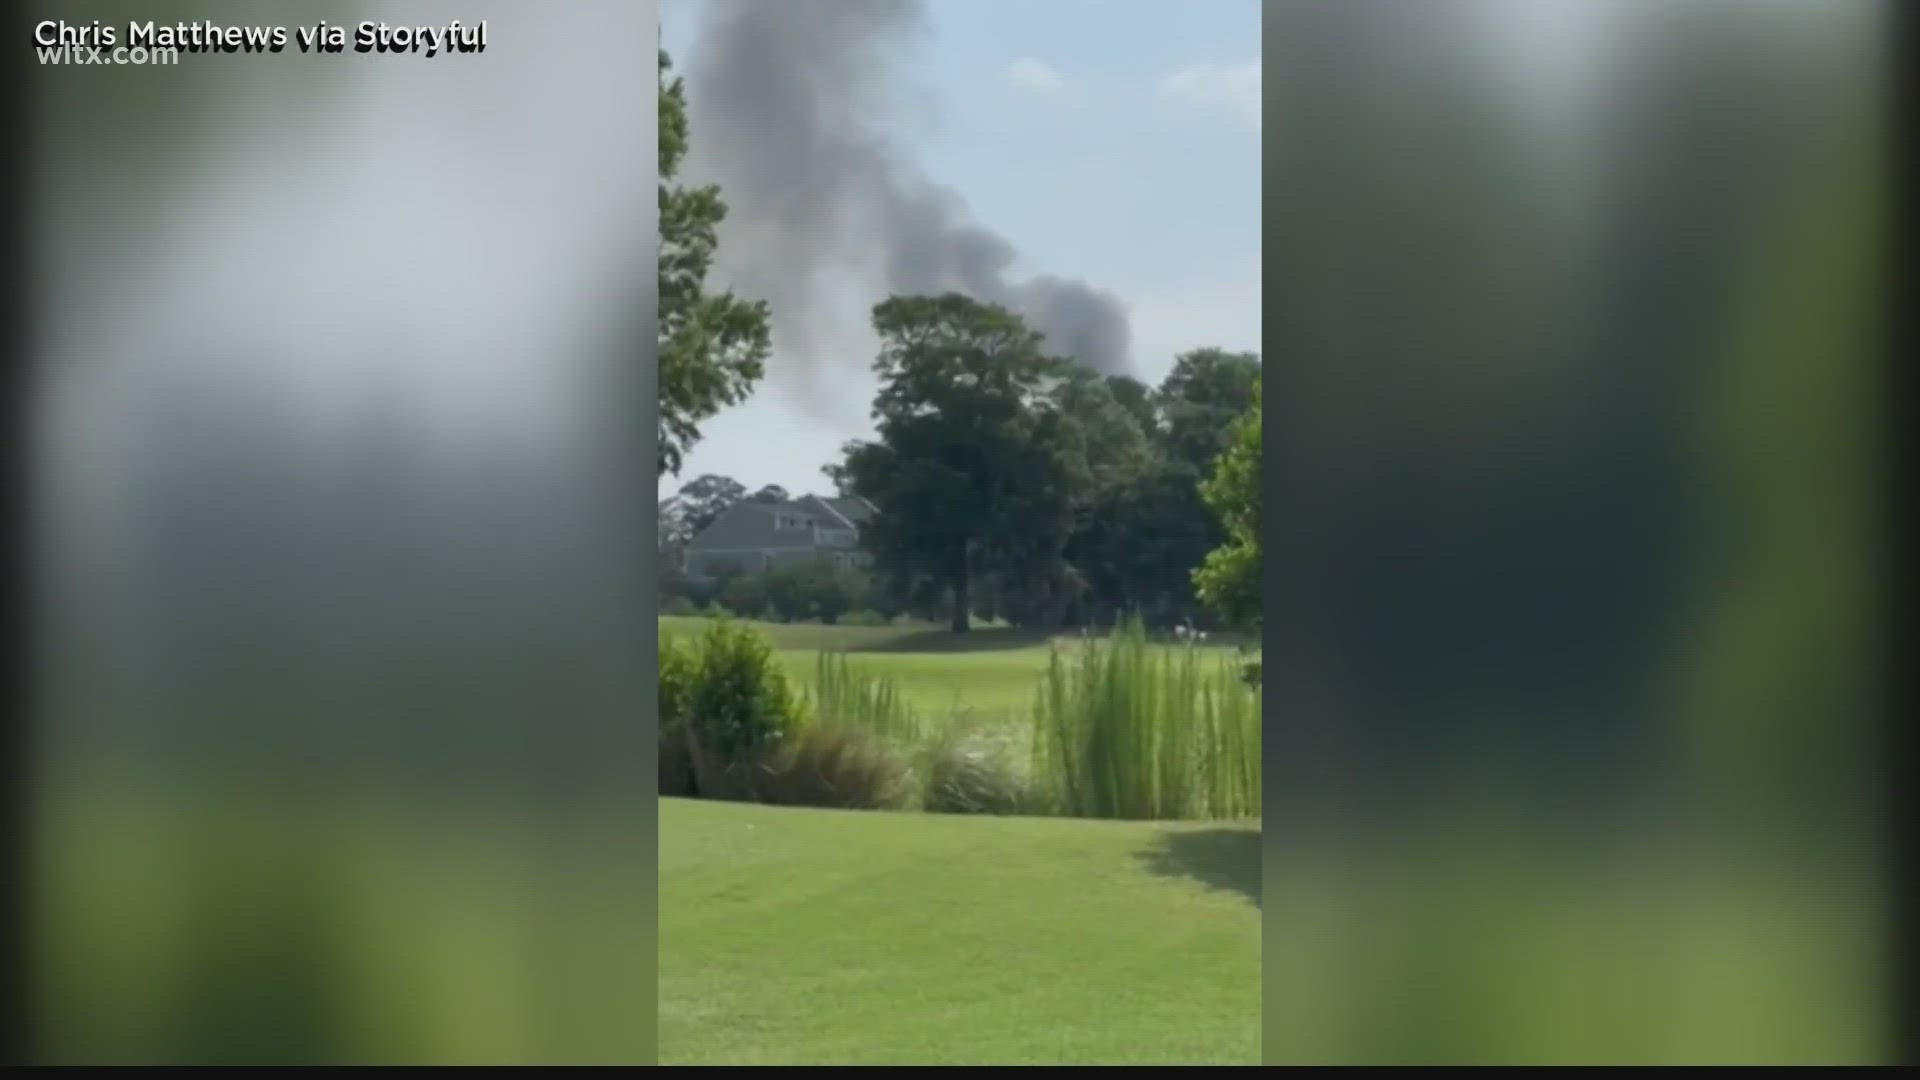 Authorities now say a plane crash in North Myrtle Beach on Sunday killed five people.